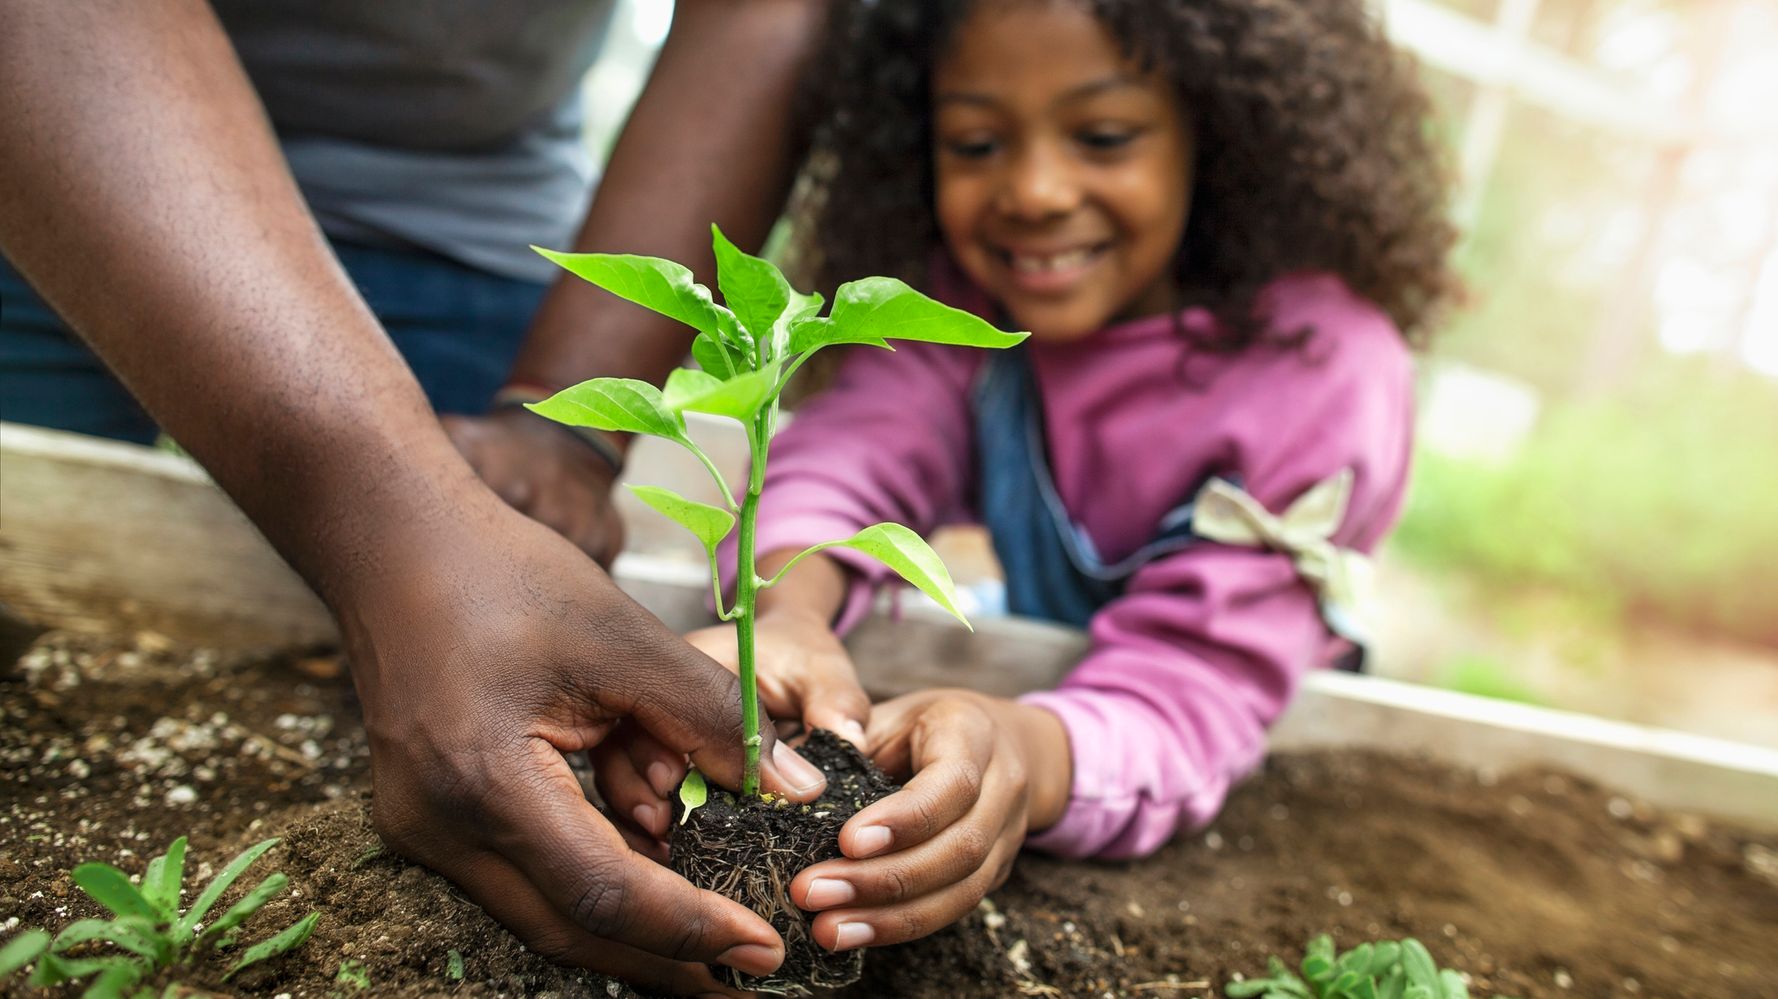 A child plants a sprout in a garden with the help of an adult.